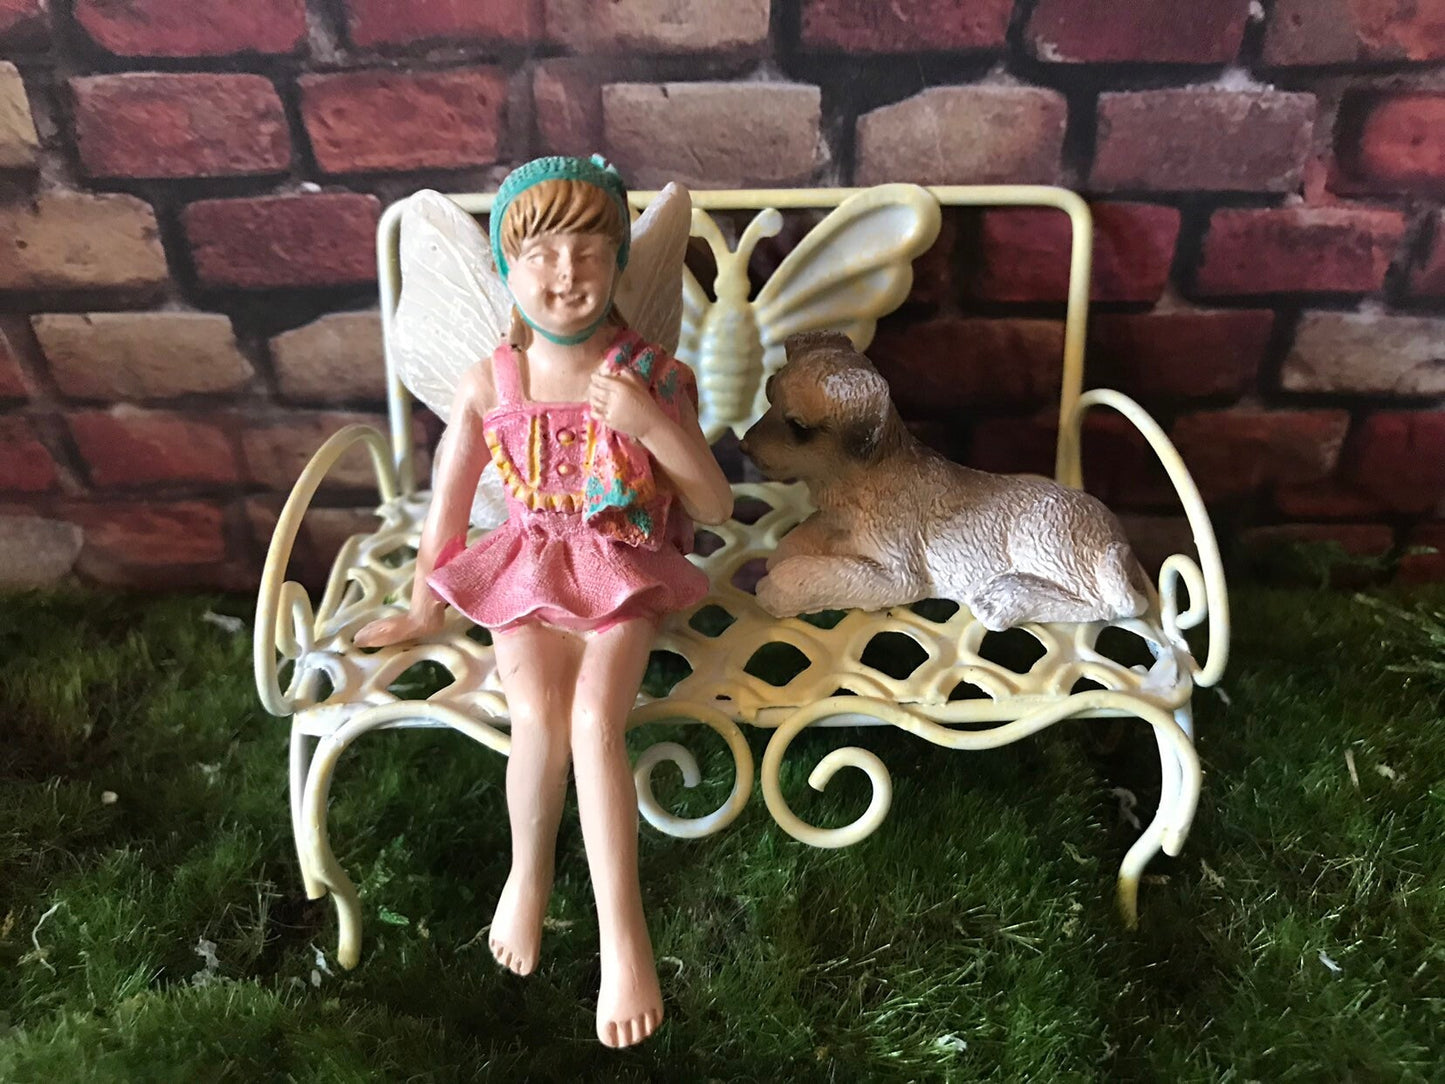 Sweet fairy figurine sitting in swimming suit and ready for summer